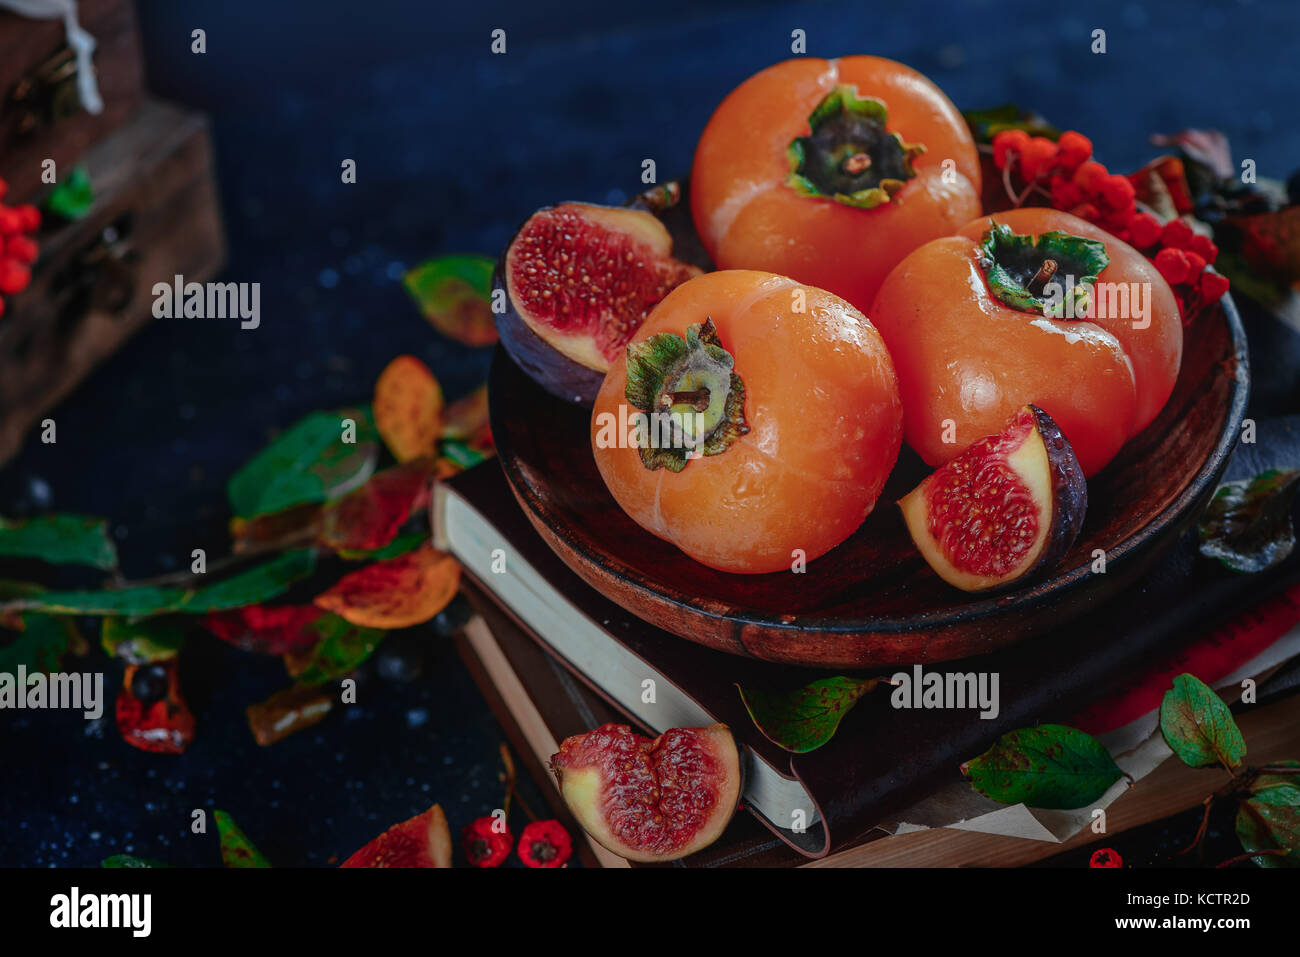 Ripe persimmons on a stack of books in a dark autumn still life with fruits and berries. Harvest concept. Dark food photography with copy space. Stock Photo